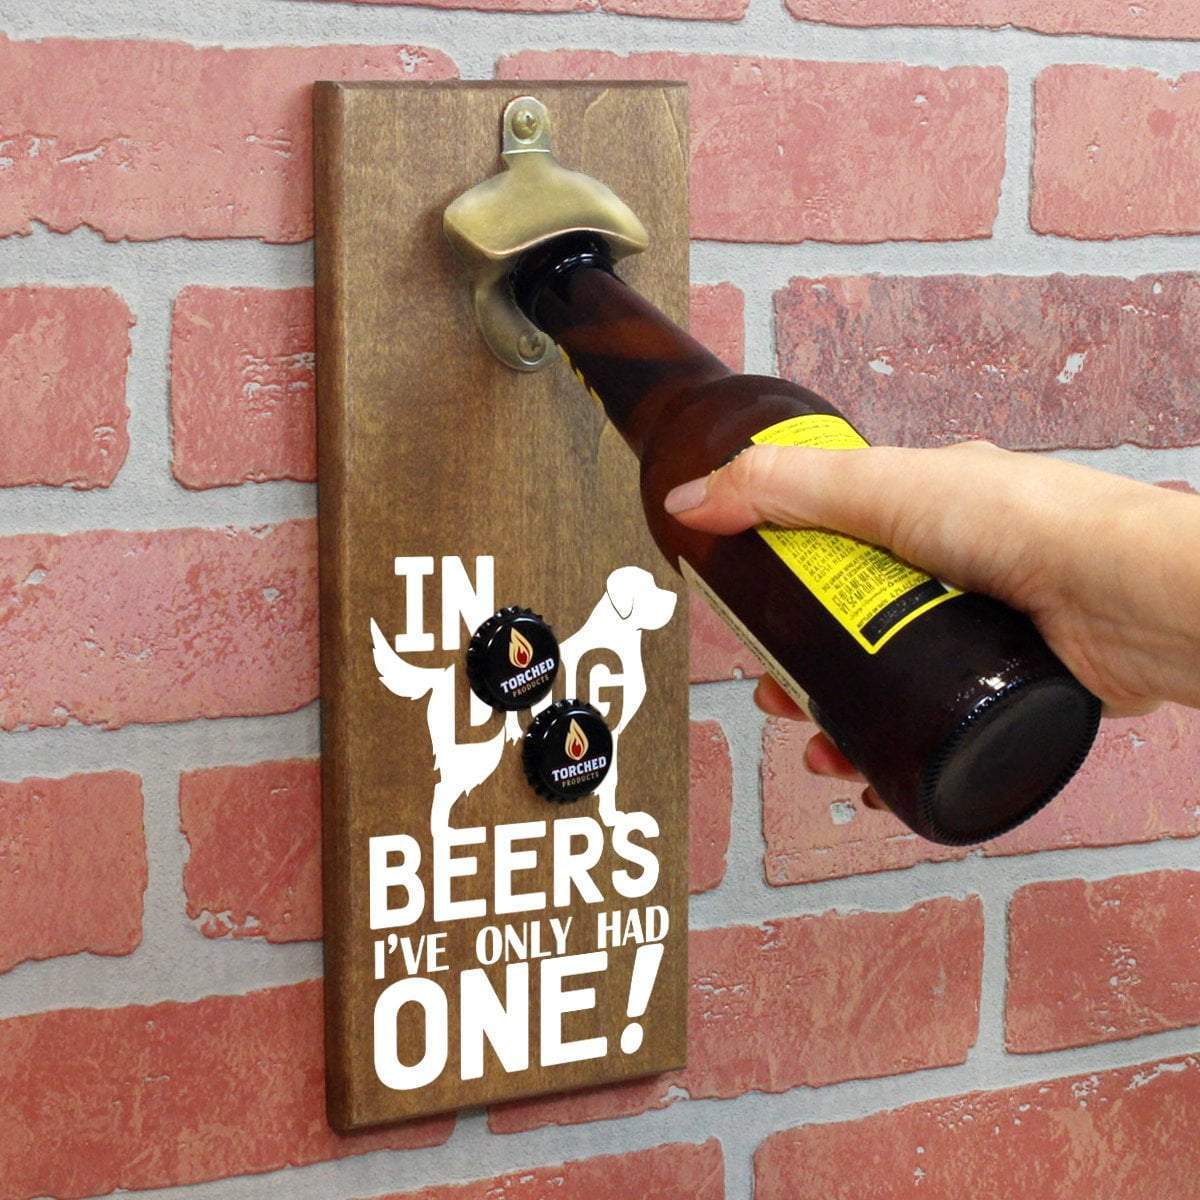 Torched Products Bottle Opener In Dog Beers I've Only Had One Bottle Opener